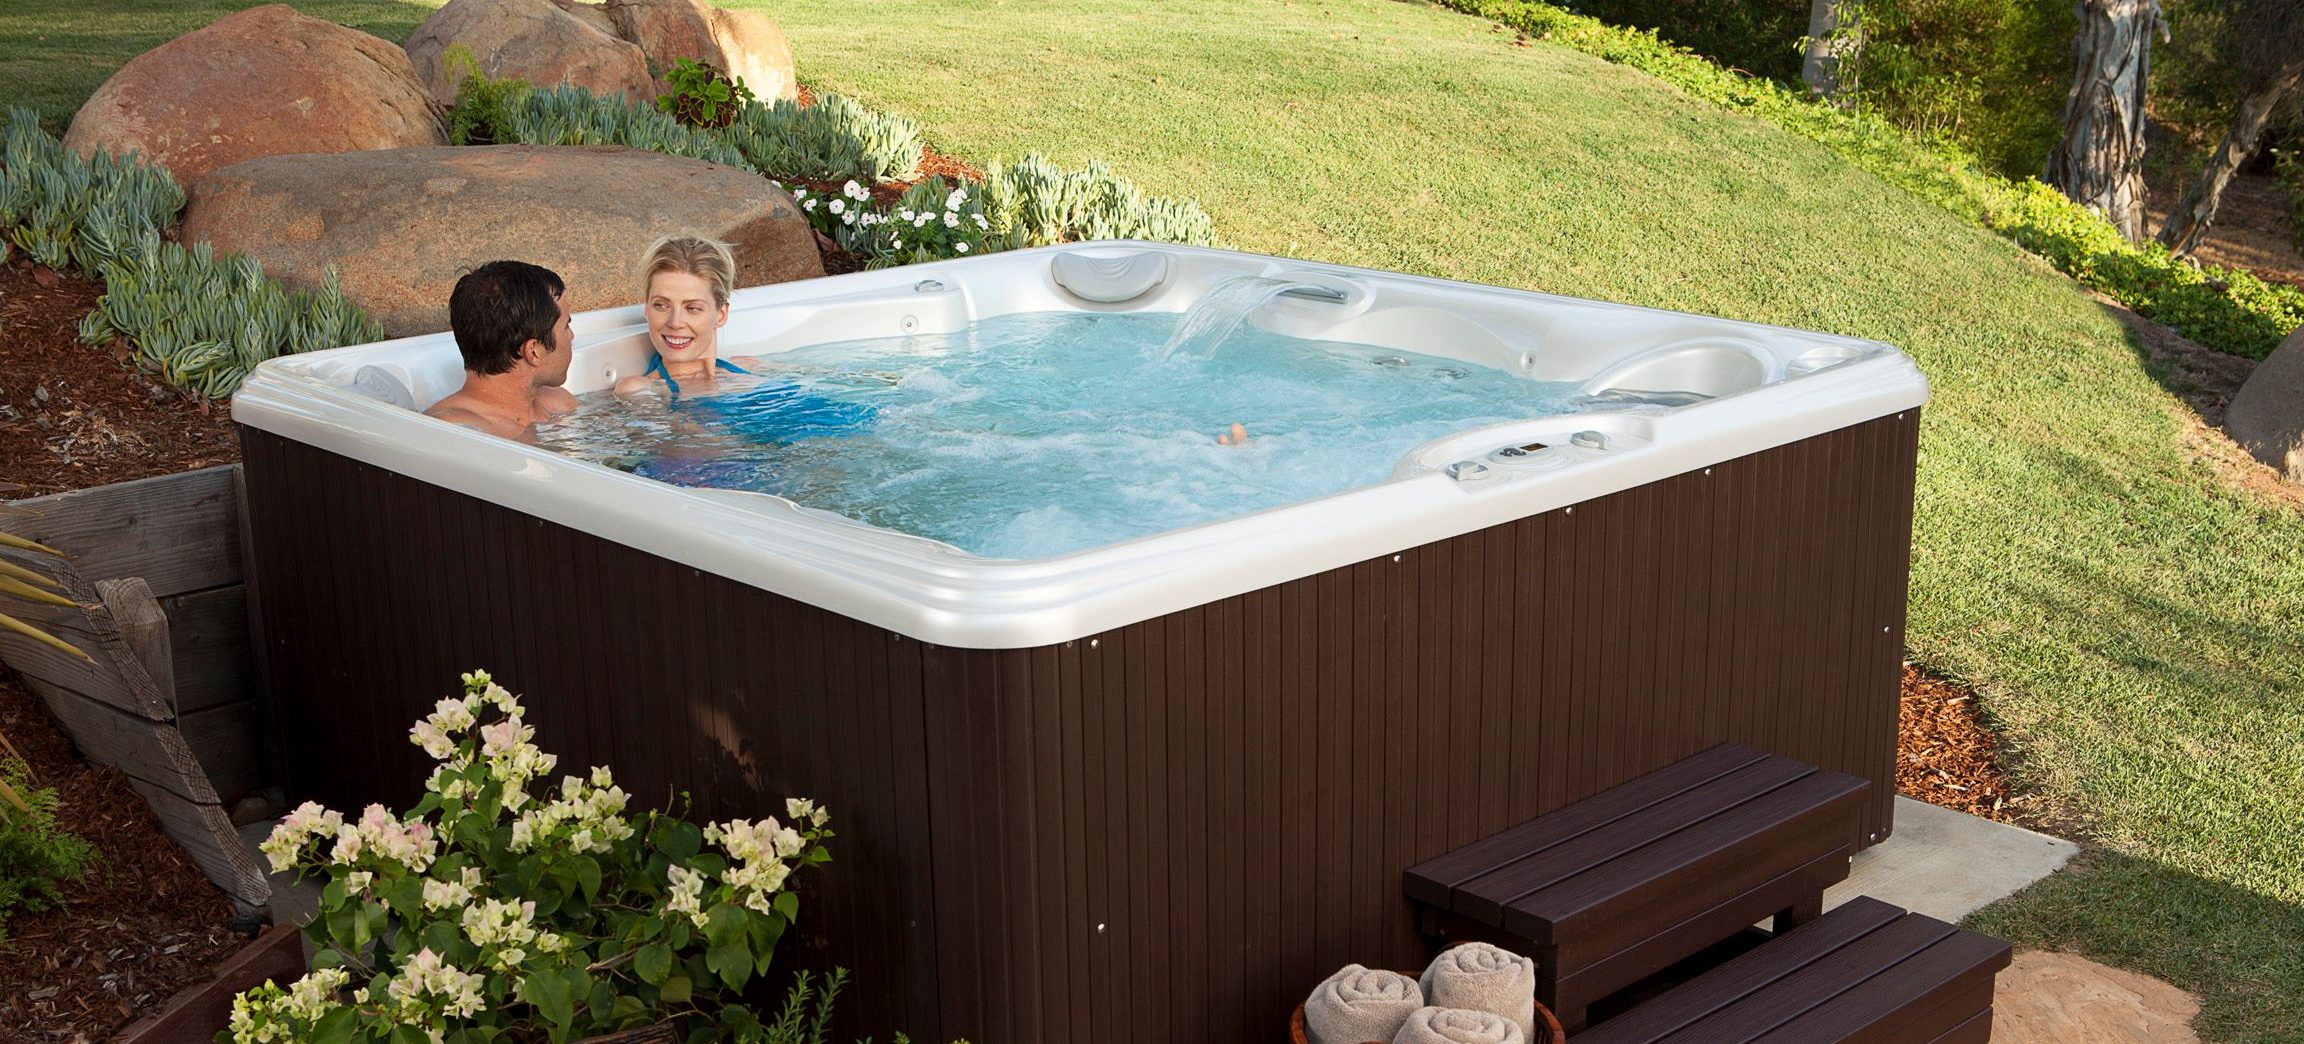 In the Mood to Save? New Vs. Used Hot Tubs